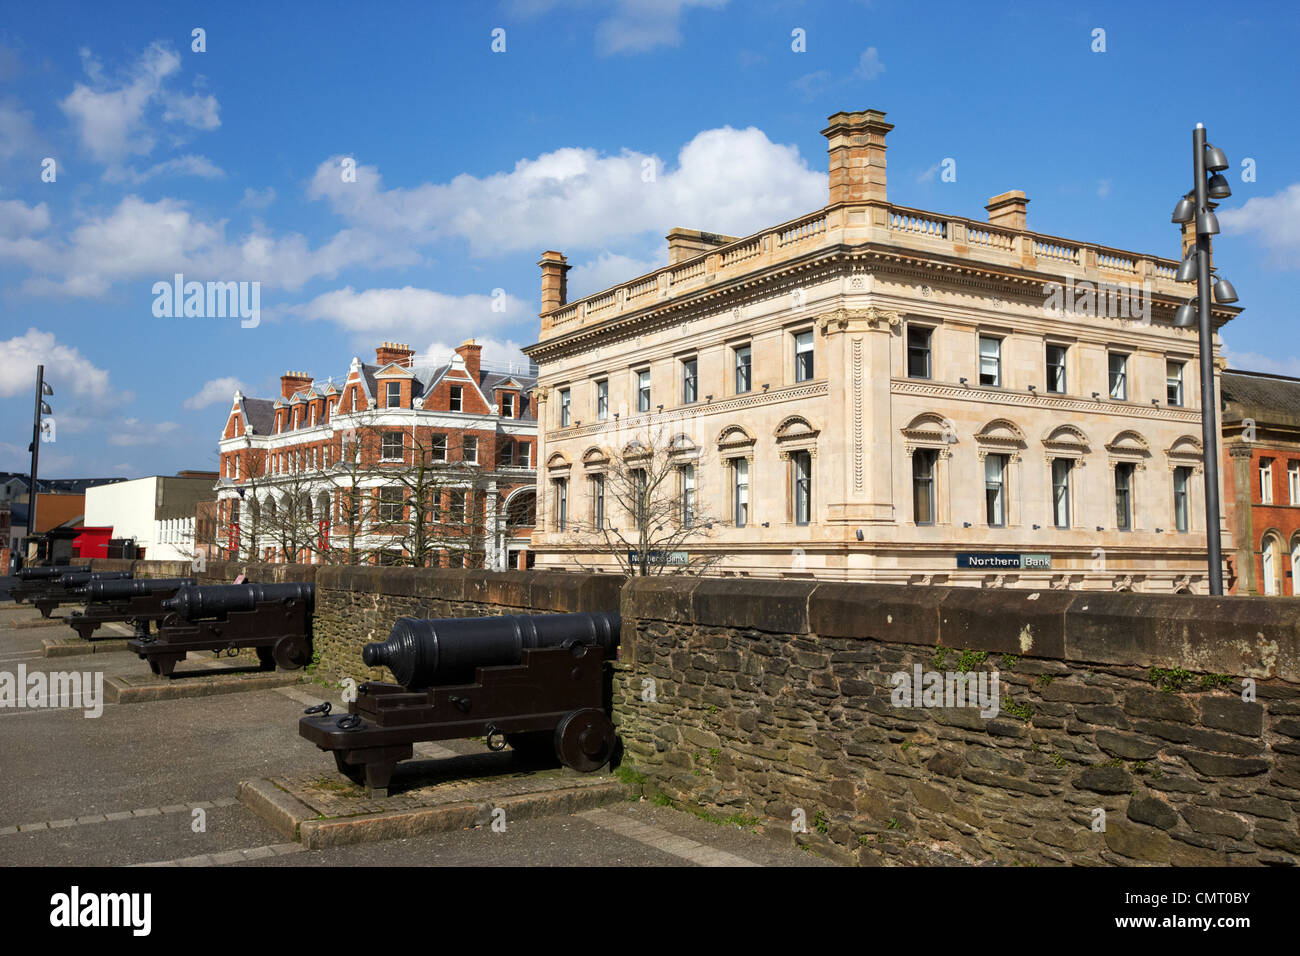 derrys walls shipquay place and buildings Derry city county londonderry northern ireland uk. Stock Photo